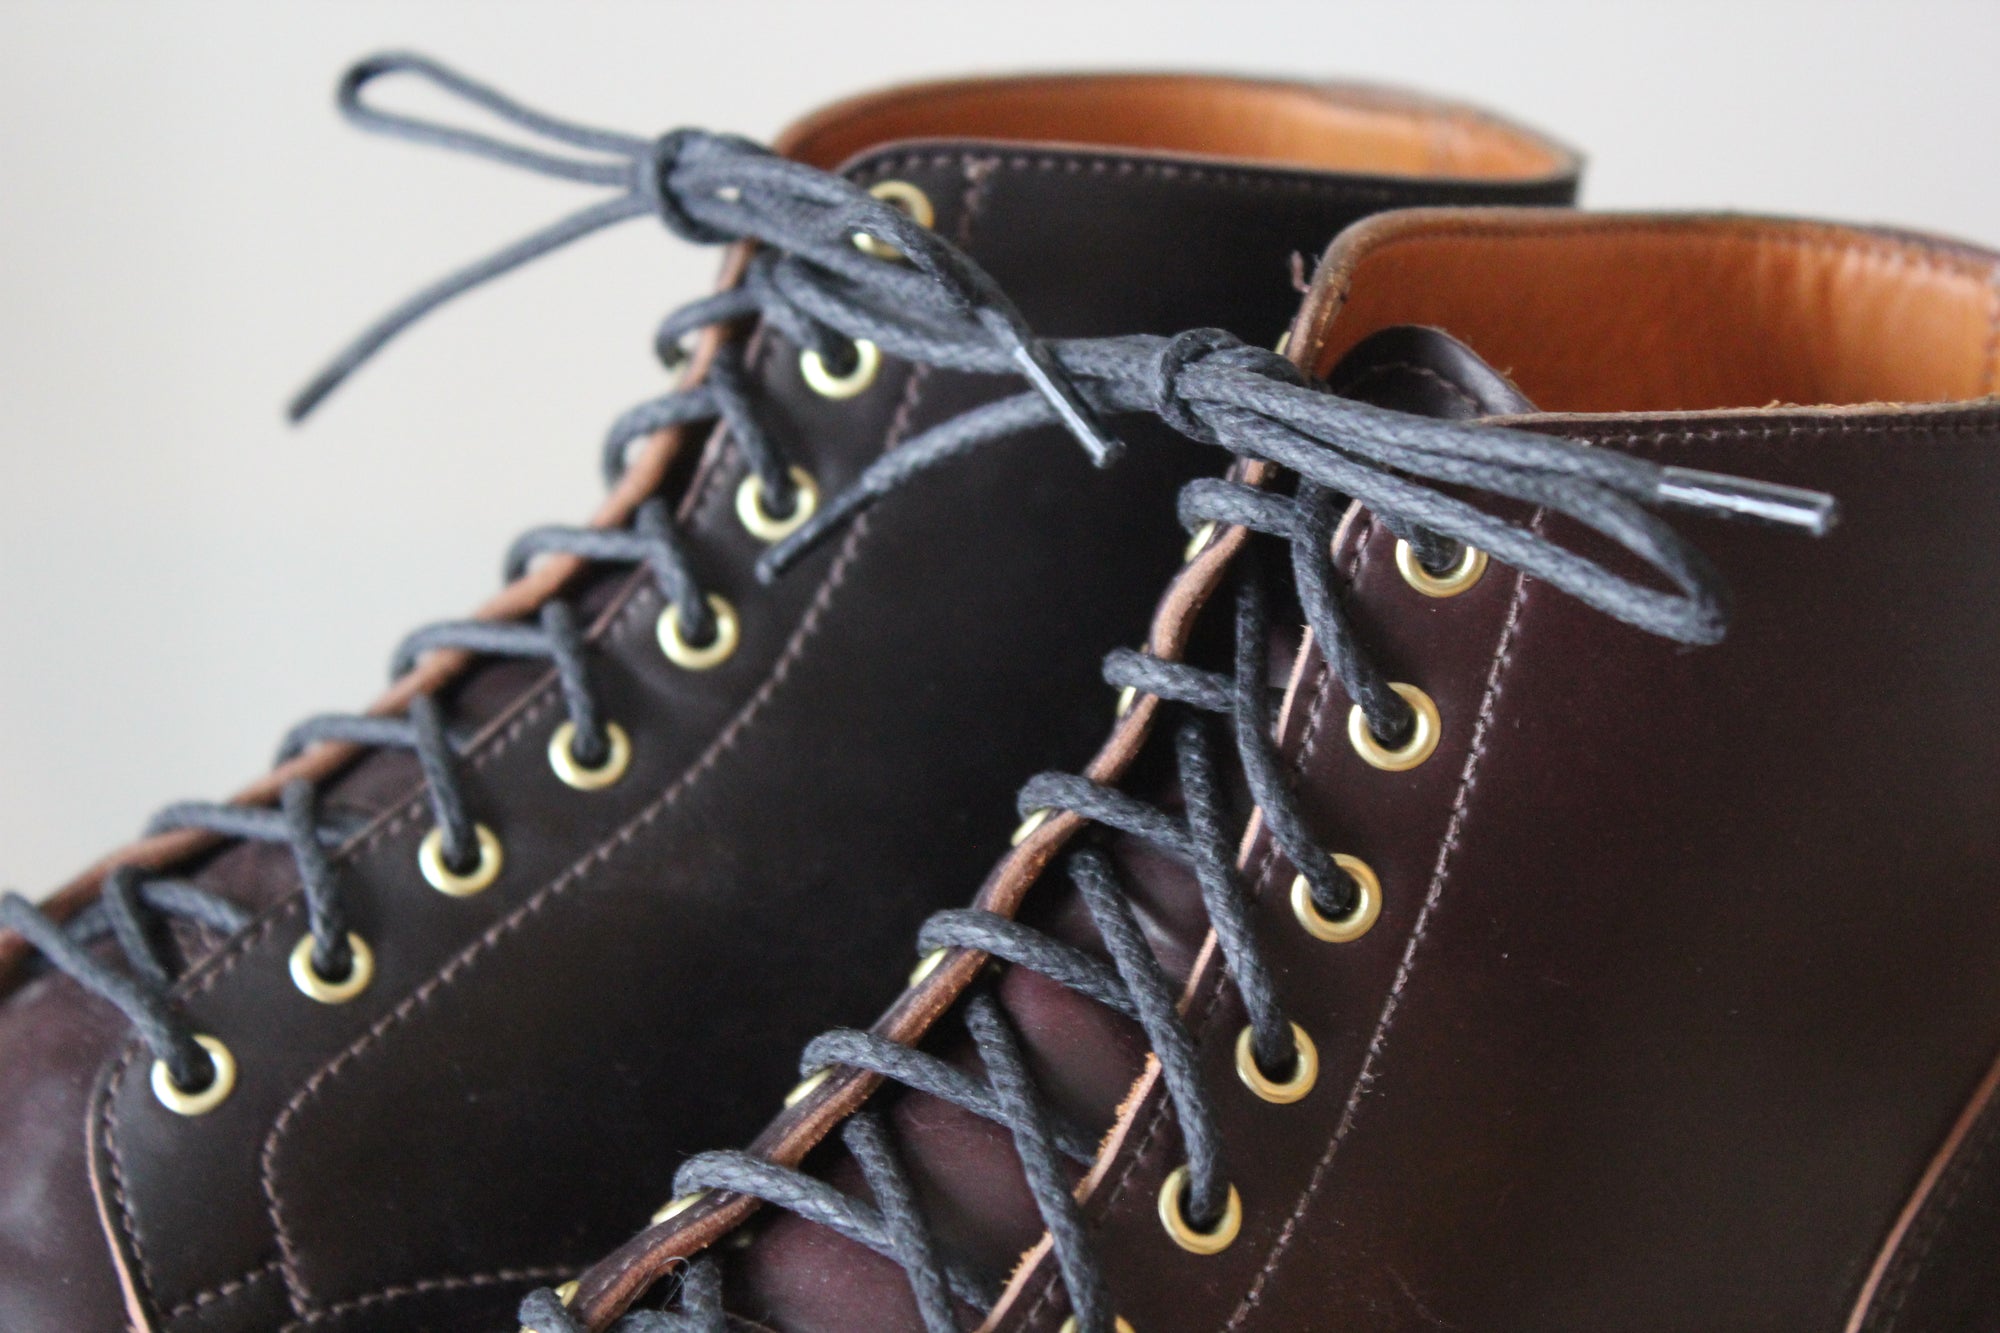 Round Red Shoelaces ← Great boot laces